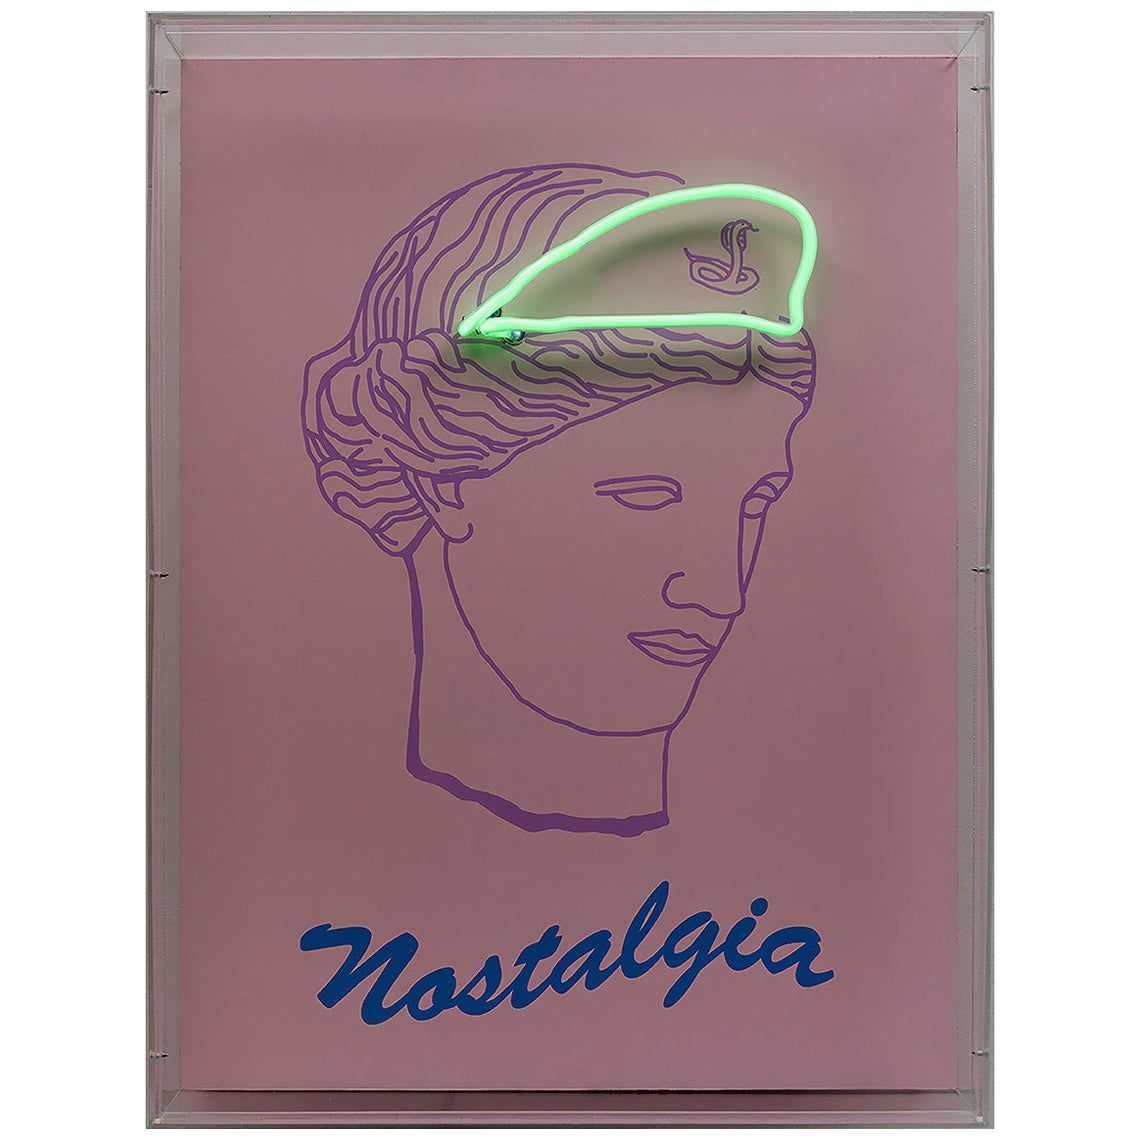 Nostalgia. Neon Light Box Wall Sculpture. From the series Neon Classics For Sale